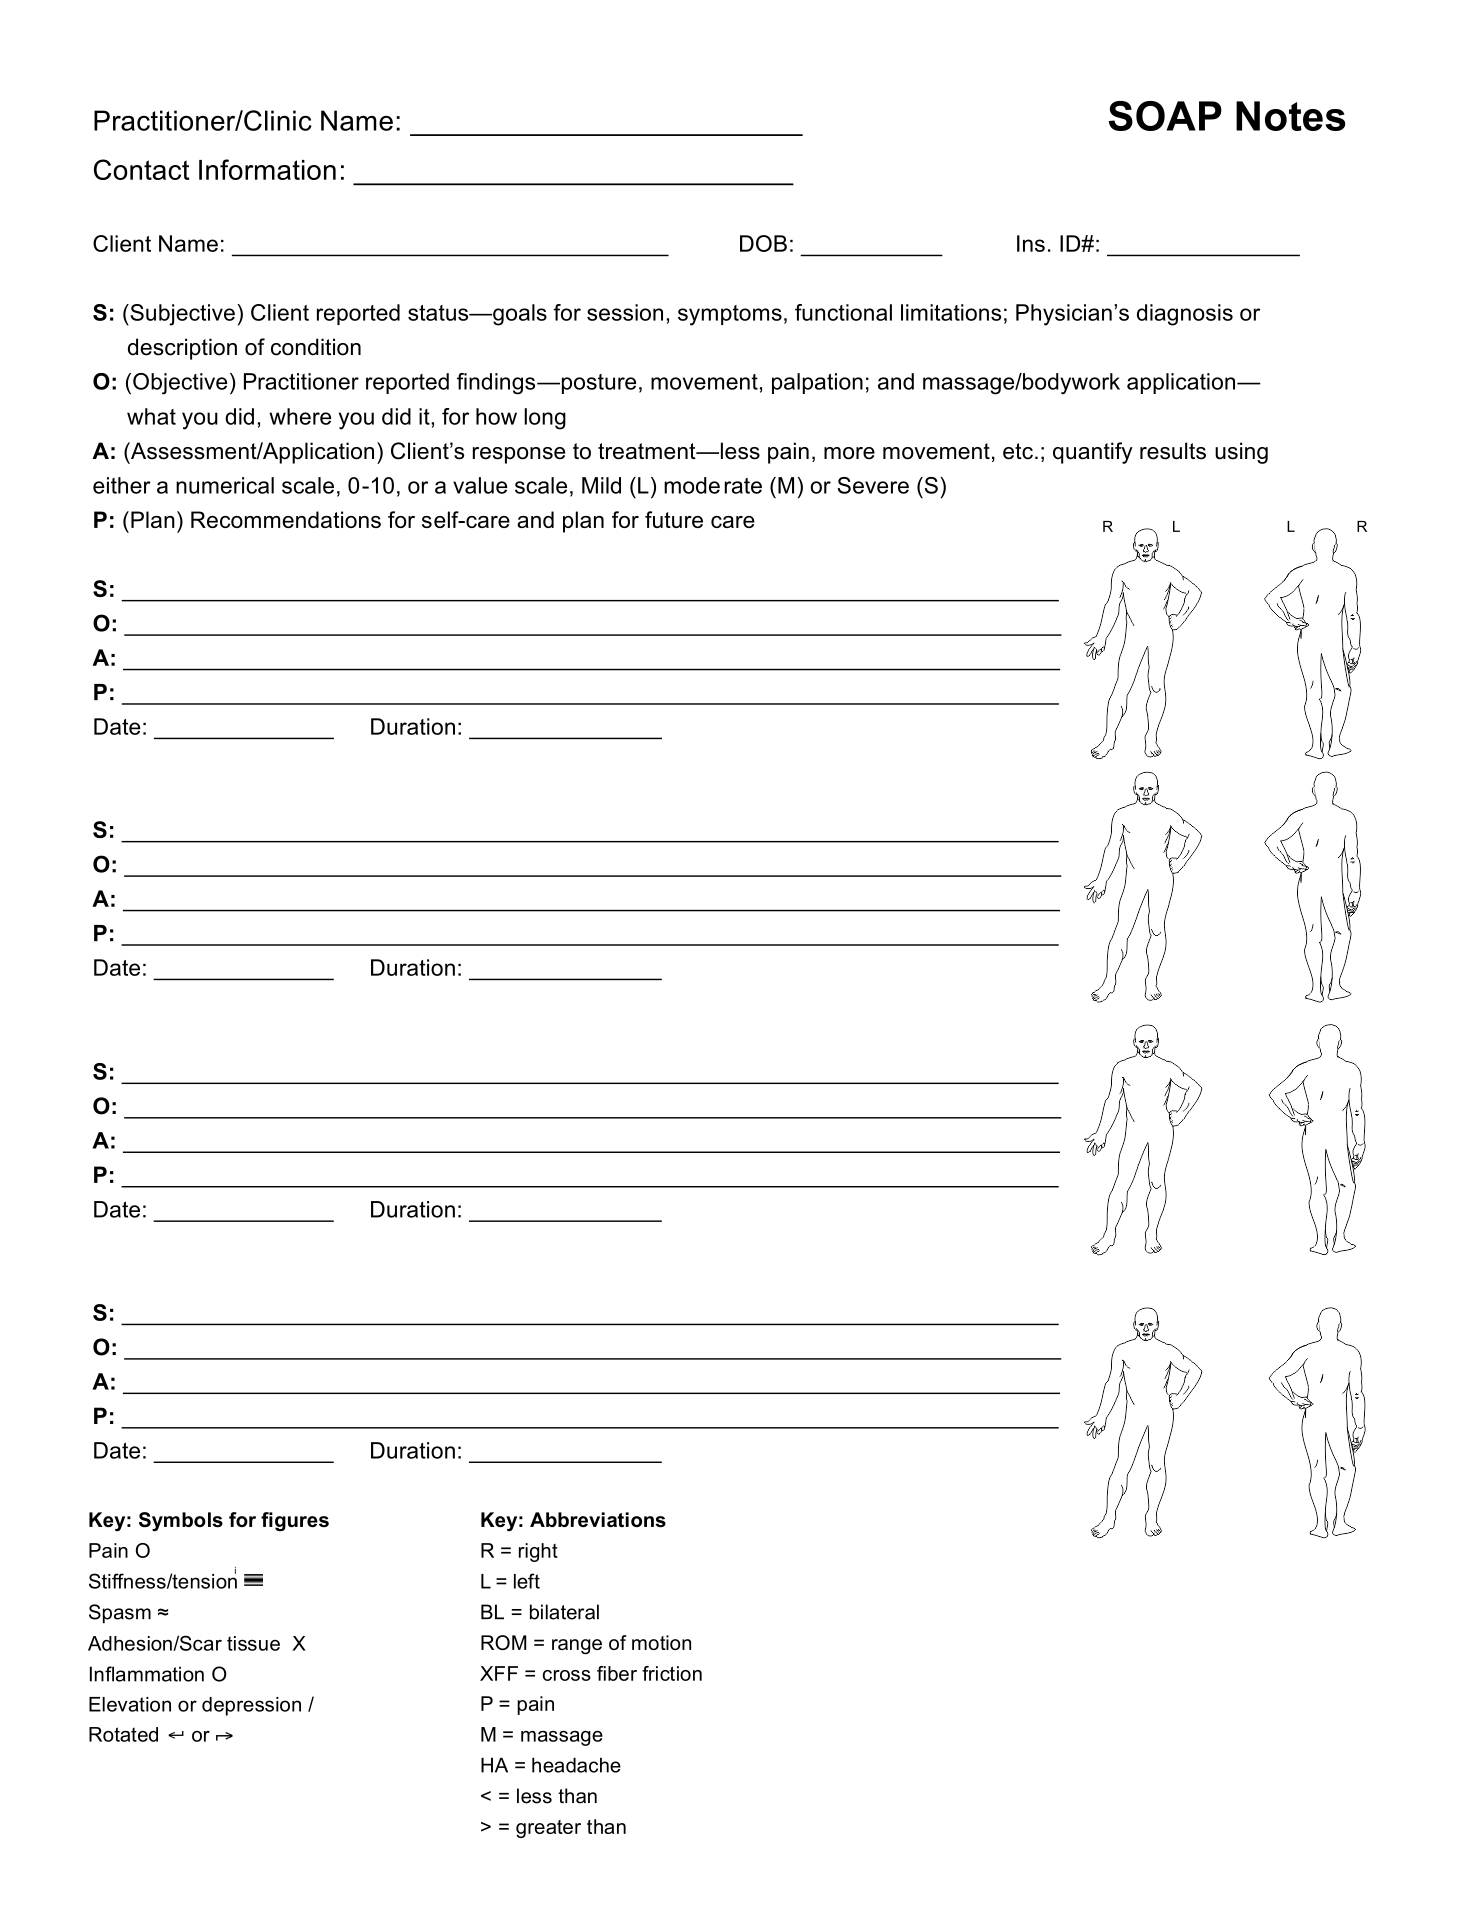 Printable Massage Therapy Soap Notes Forms - Printable Forms Free Online